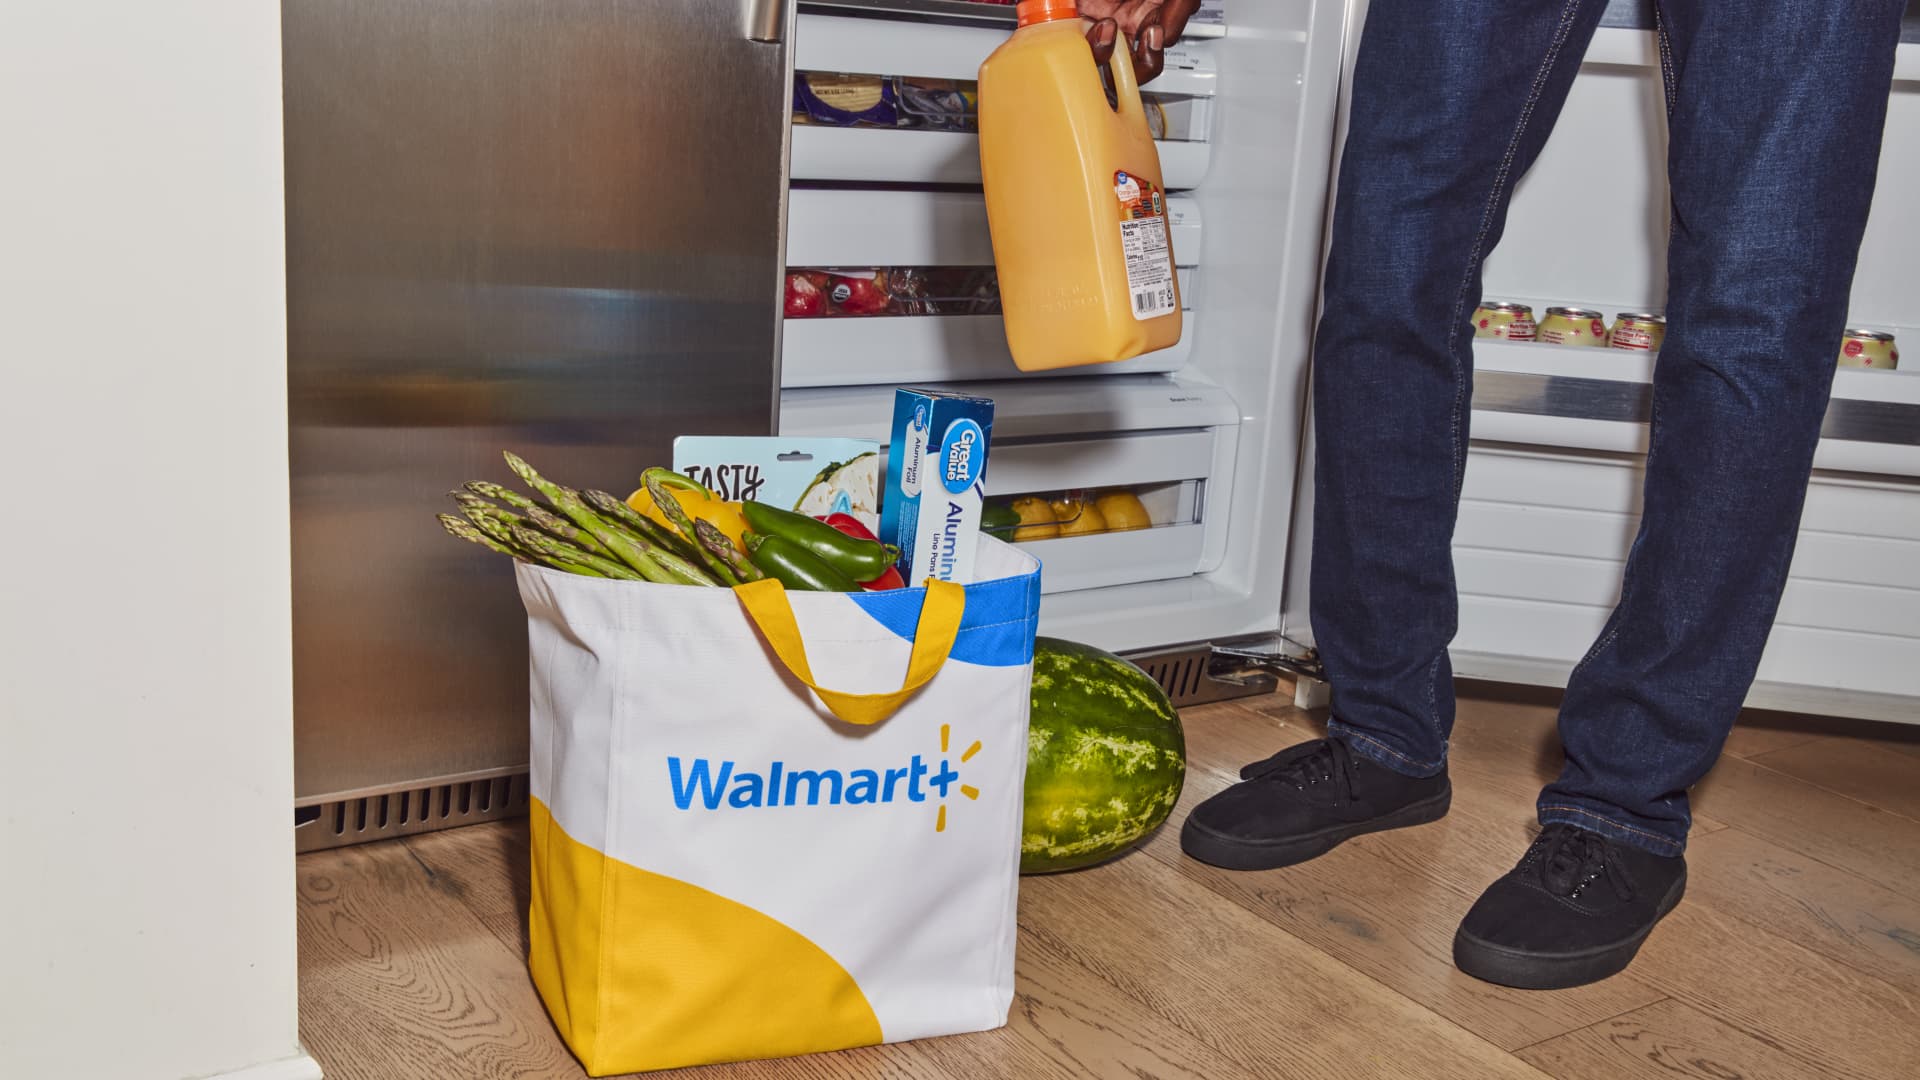 Walmart bets inflation will push customers to join subscription service